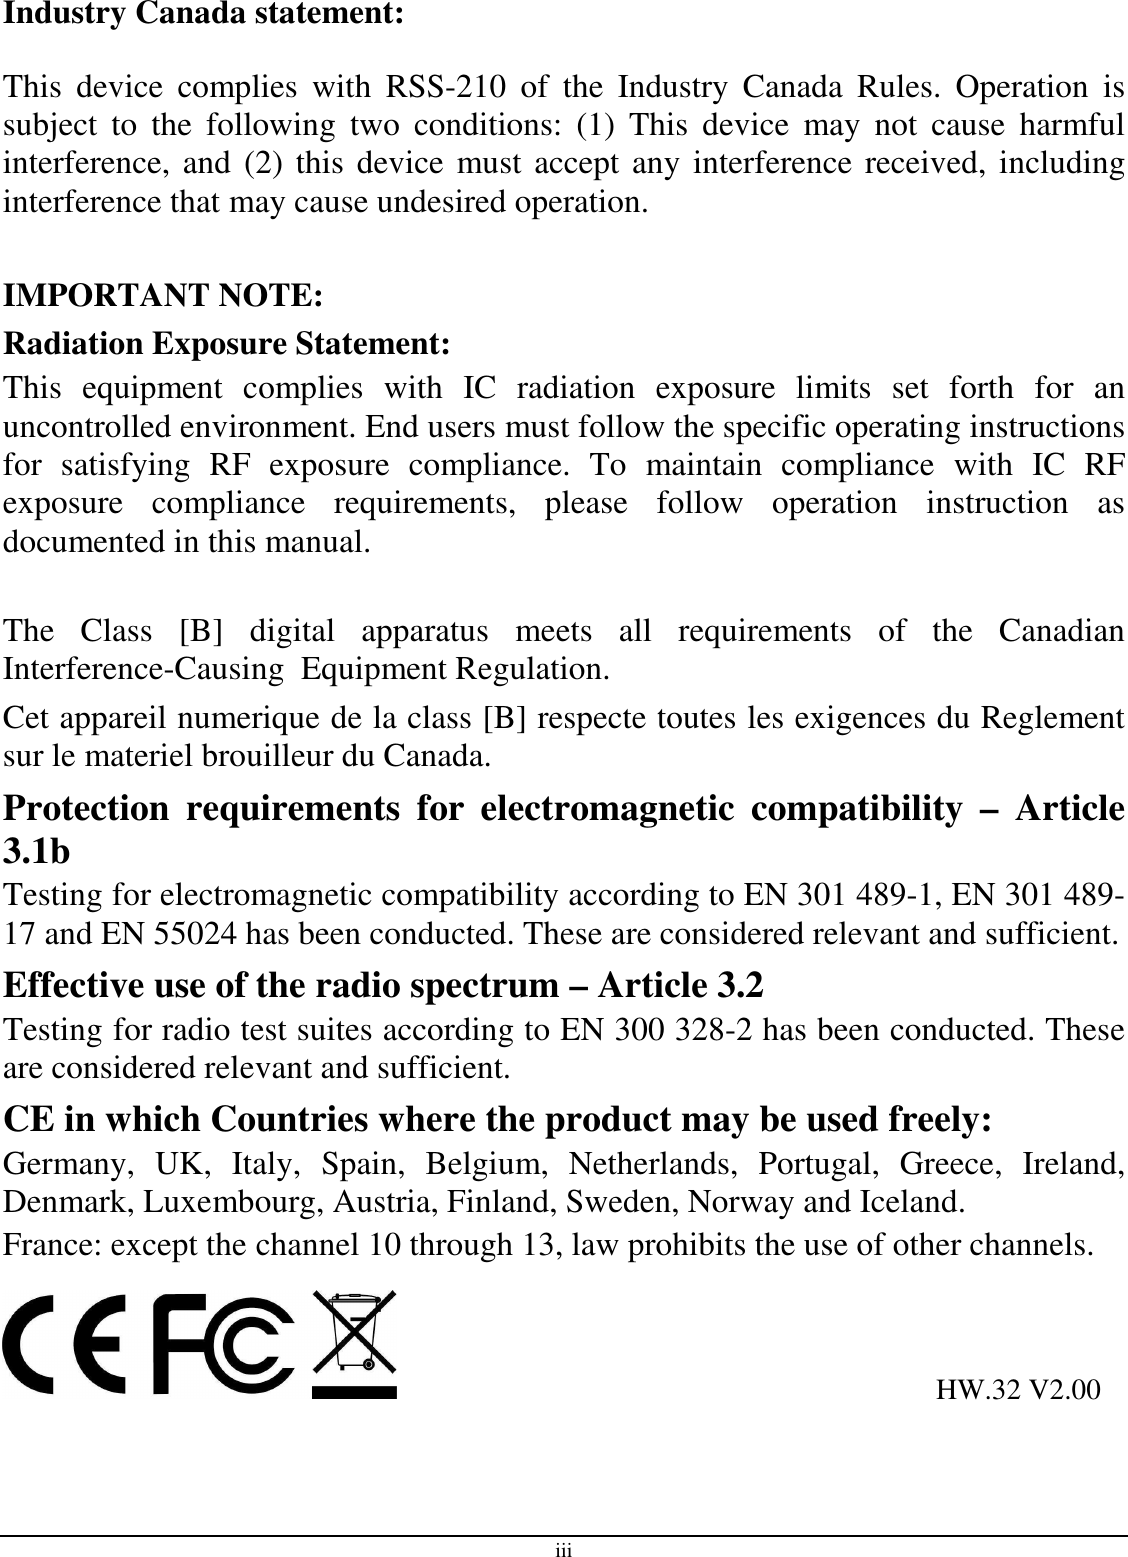 iii Industry Canada statement:  This  device  complies  with  RSS-210  of  the  Industry  Canada  Rules.  Operation  is subject  to  the  following  two  conditions:  (1)  This  device  may  not  cause  harmful interference, and (2) this device must accept any interference received, including interference that may cause undesired operation.  IMPORTANT NOTE: Radiation Exposure Statement: This  equipment  complies  with  IC  radiation  exposure  limits  set  forth  for  an uncontrolled environment. End users must follow the specific operating instructions for  satisfying  RF  exposure  compliance.  To  maintain  compliance  with  IC  RF exposure  compliance  requirements,  please  follow  operation  instruction  as documented in this manual.   The  Class  [B]  digital  apparatus  meets  all  requirements  of  the  Canadian Interference-Causing  Equipment Regulation. Cet appareil numerique de la class [B] respecte toutes les exigences du Reglement sur le materiel brouilleur du Canada. Protection  requirements  for  electromagnetic  compatibility  –  Article 3.1b Testing for electromagnetic compatibility according to EN 301 489-1, EN 301 489-17 and EN 55024 has been conducted. These are considered relevant and sufficient. Effective use of the radio spectrum – Article 3.2 Testing for radio test suites according to EN 300 328-2 has been conducted. These are considered relevant and sufficient. CE in which Countries where the product may be used freely: Germany,  UK,  Italy,  Spain,  Belgium,  Netherlands,  Portugal,  Greece,  Ireland, Denmark, Luxembourg, Austria, Finland, Sweden, Norway and Iceland. France: except the channel 10 through 13, law prohibits the use of other channels.                                                                            HW.32 V2.00 